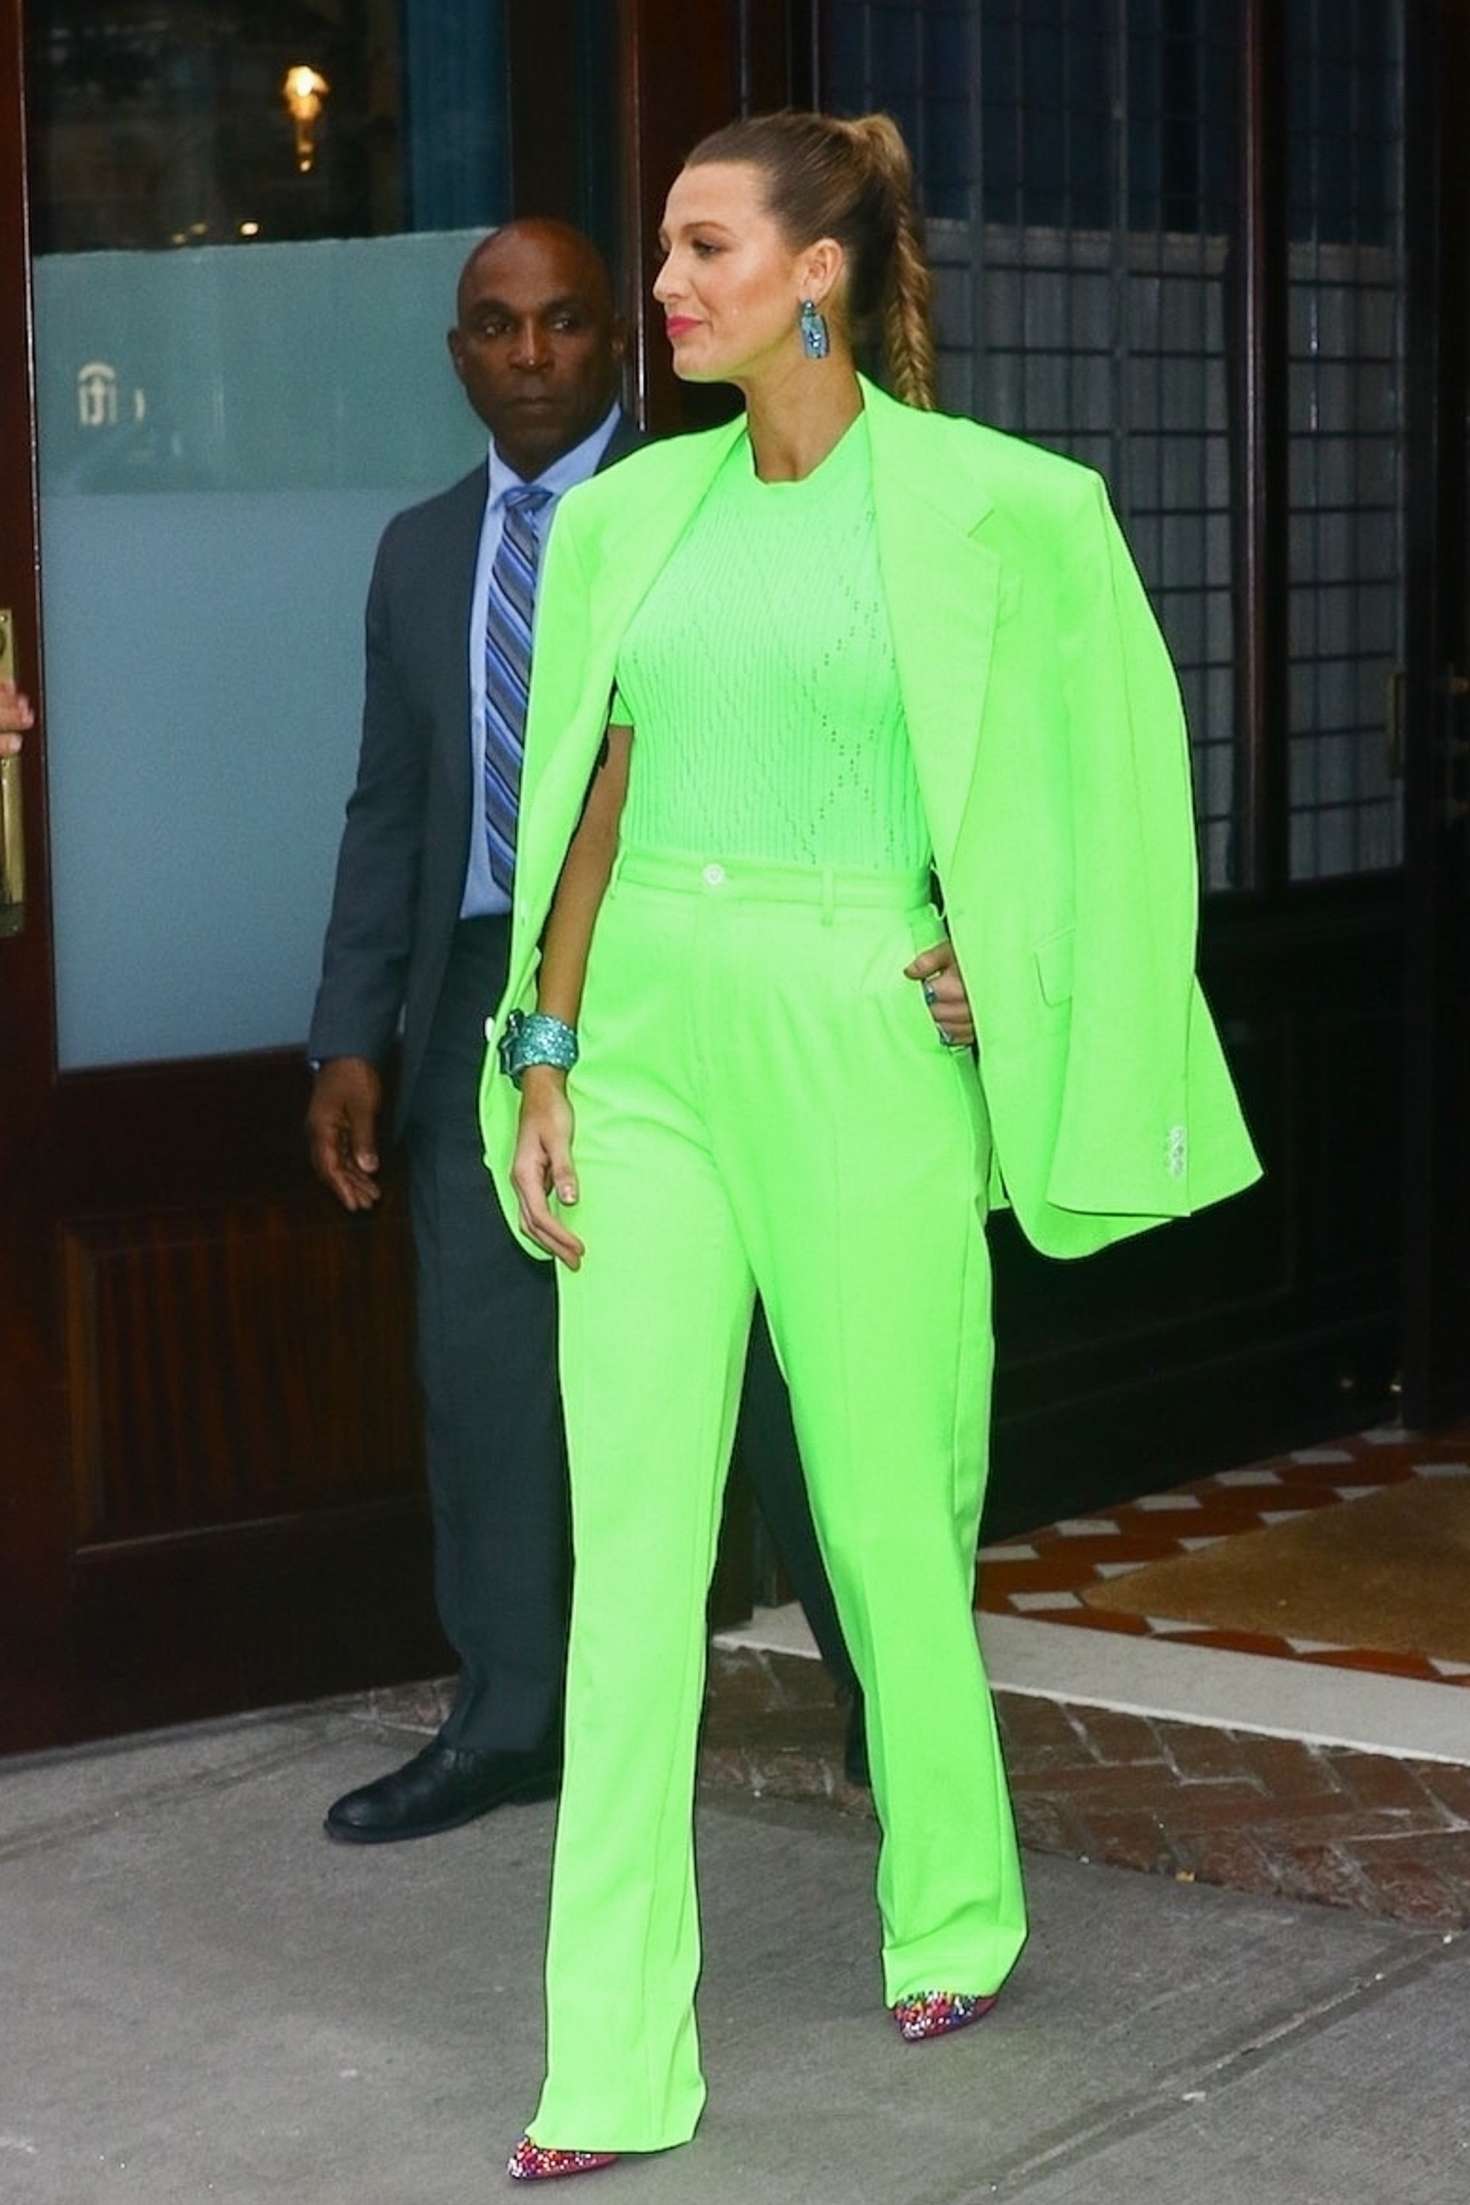 Blake Lively in Neon Green Suit at Spring Studios in New York City